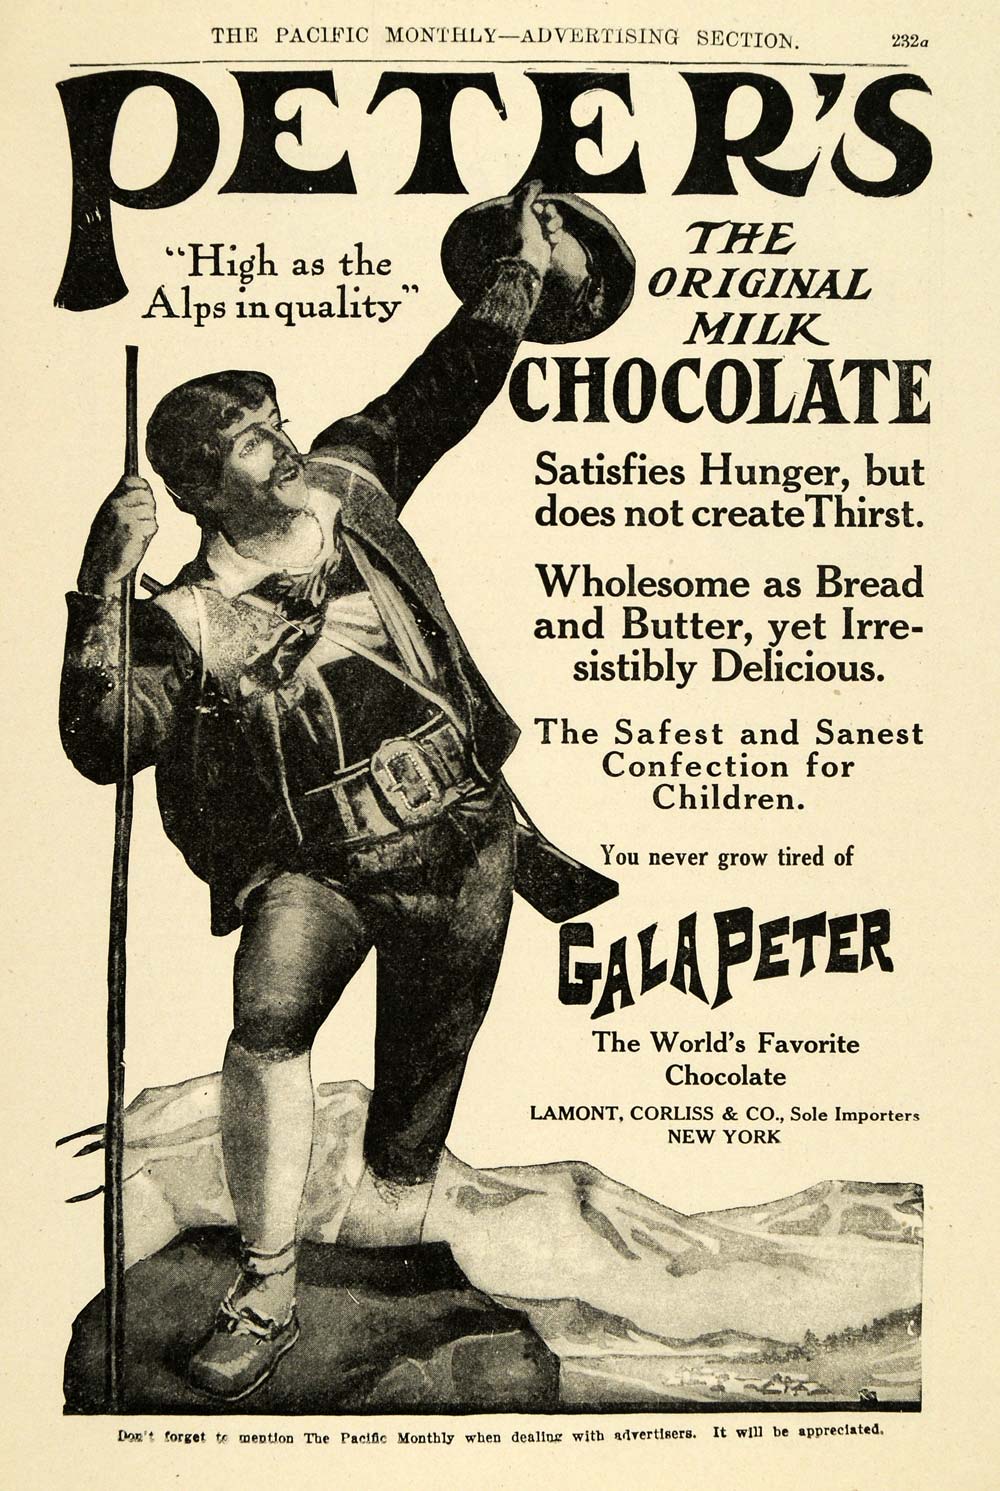 1908 Ad GalaPeter Chocolate Lamont Corliss Confections - ORIGINAL PM2